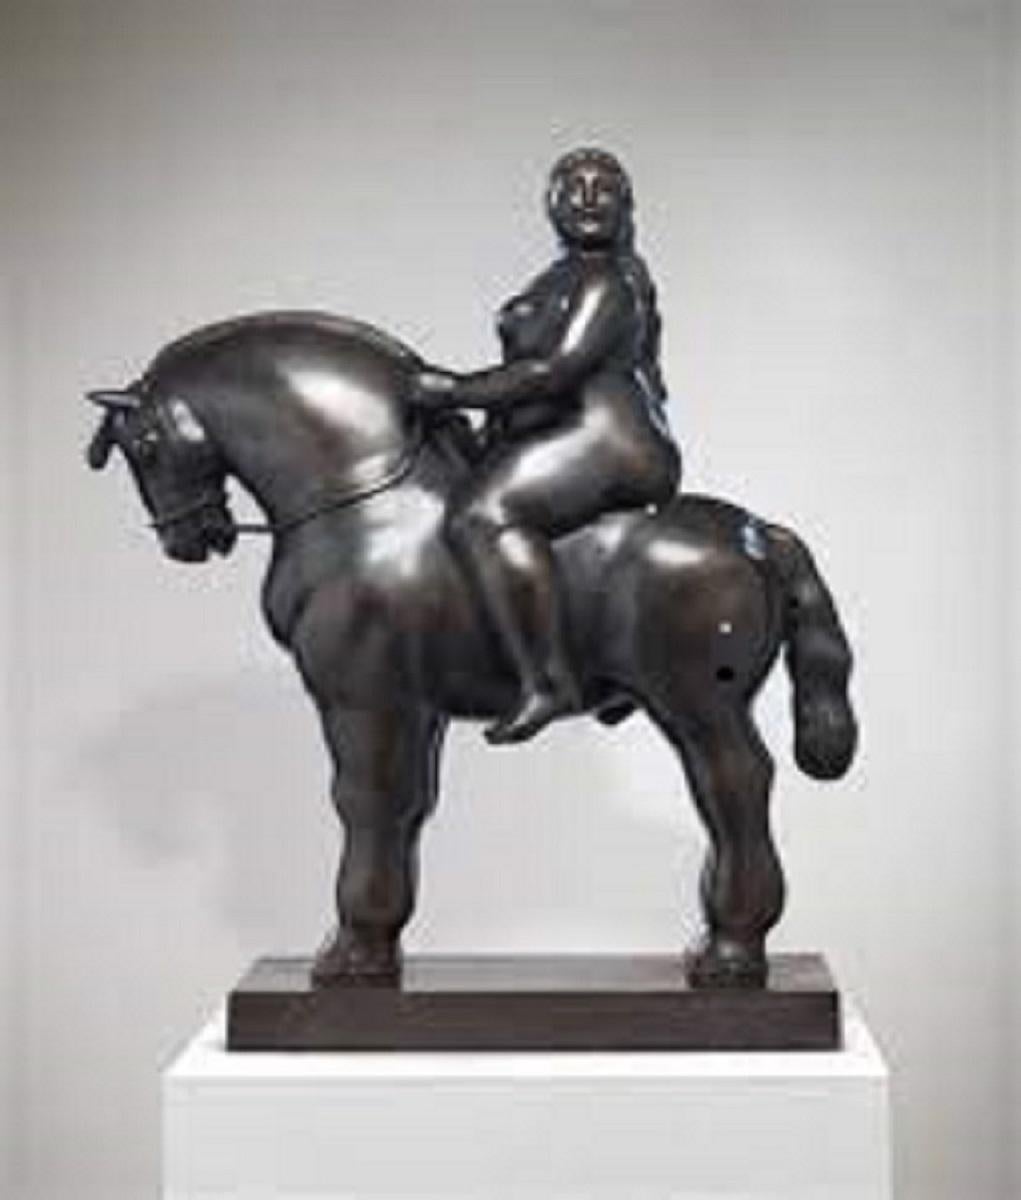 AFTER Fernando Botero was born in Medellin in 1932. From Colombia, he travelled to Spain and Paris before settling down in Florence where he found inspiration in the Italian Quattrocentro masters, discovering techniques from a bygone era. Today, he